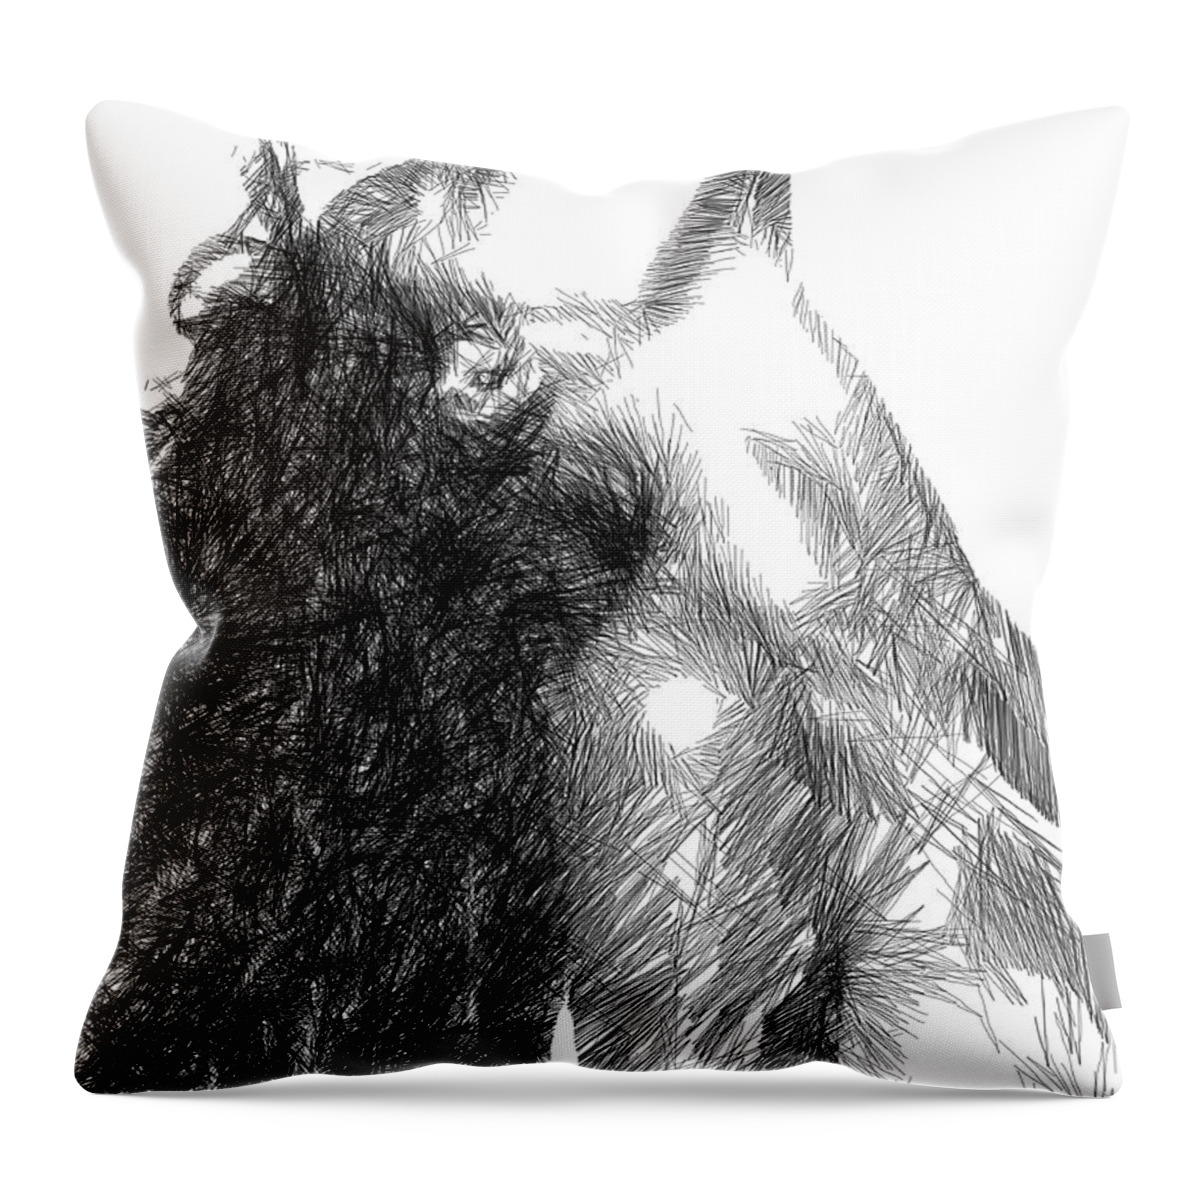 Ink Drawing Throw Pillow featuring the digital art Take it all In by Rafael Salazar